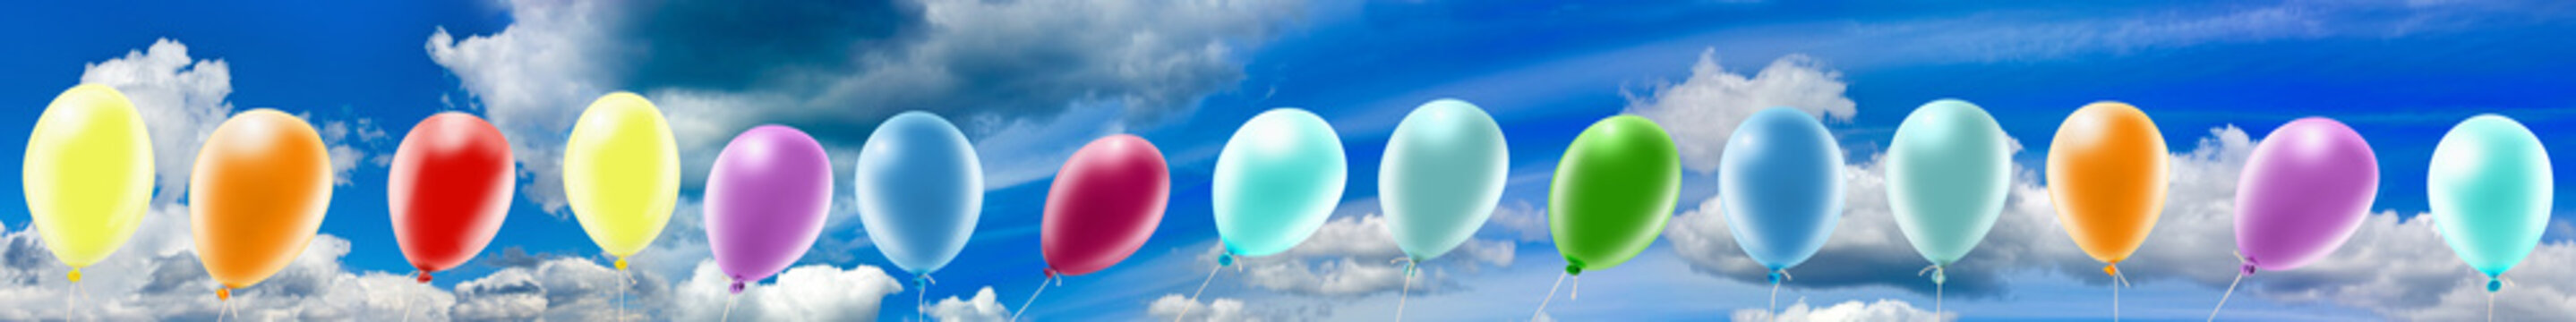 image of balloons against the sky